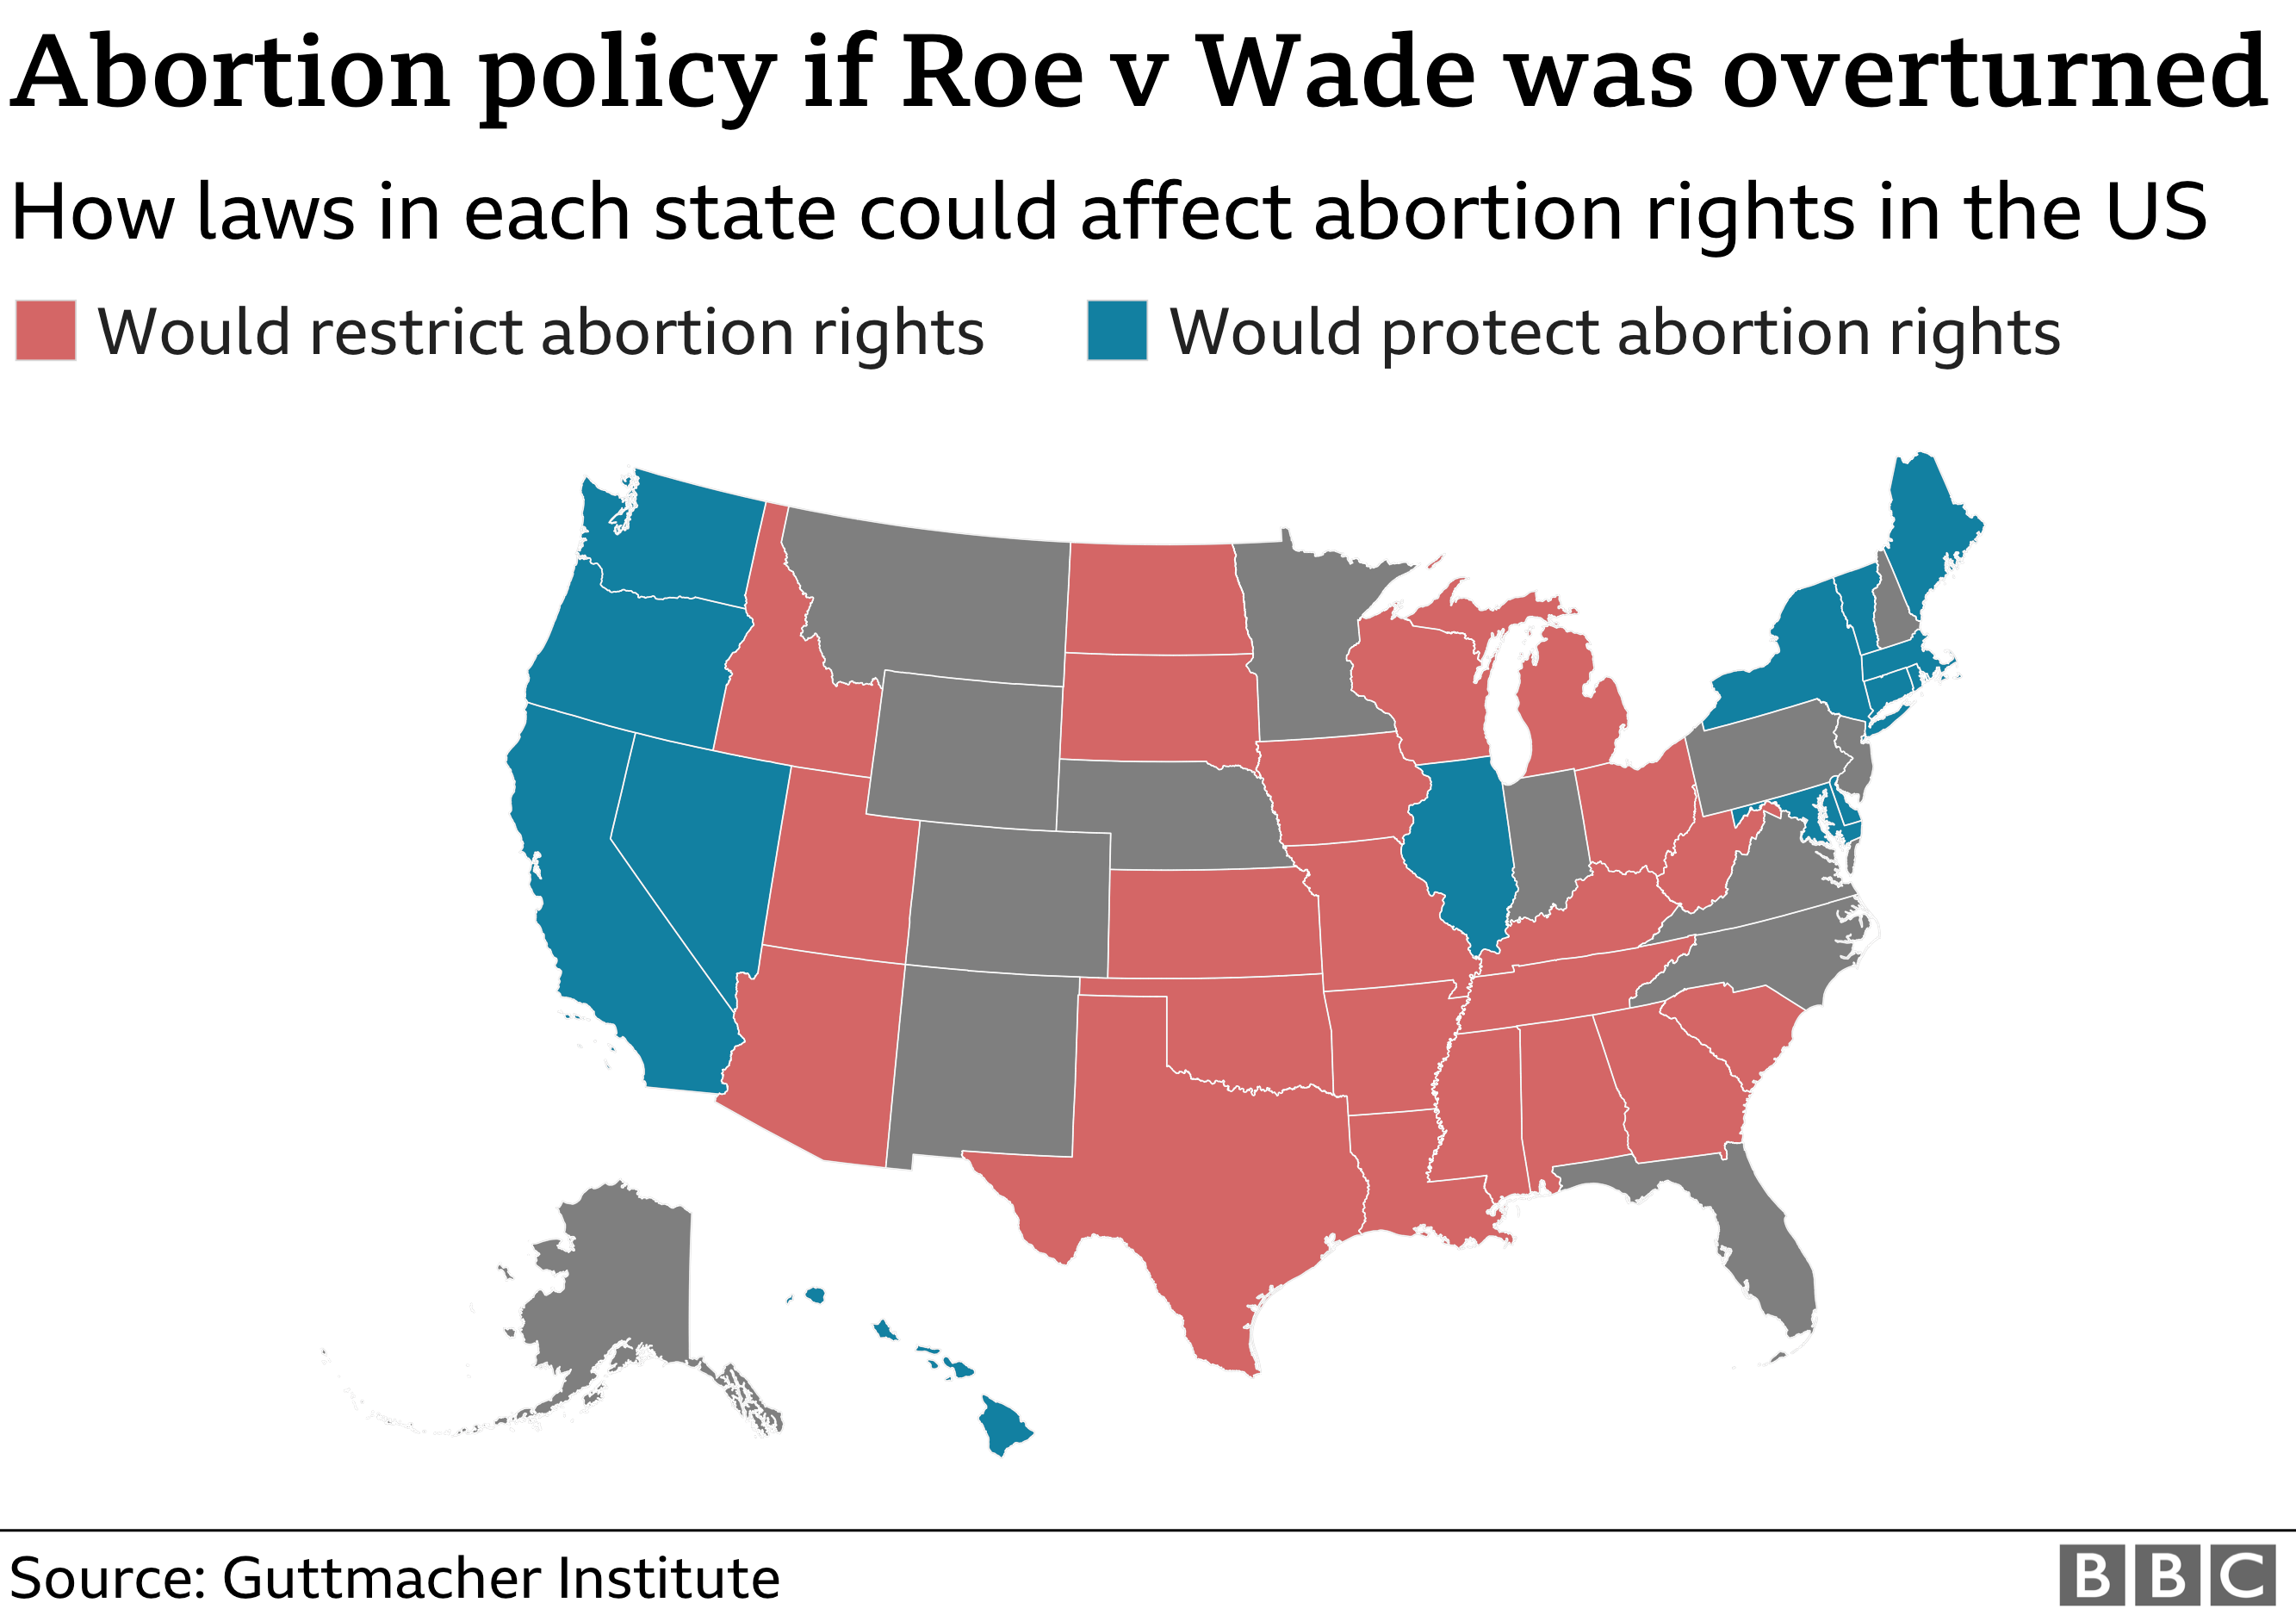 A map showing abortion policy in the US if Roe v Wade was overturned